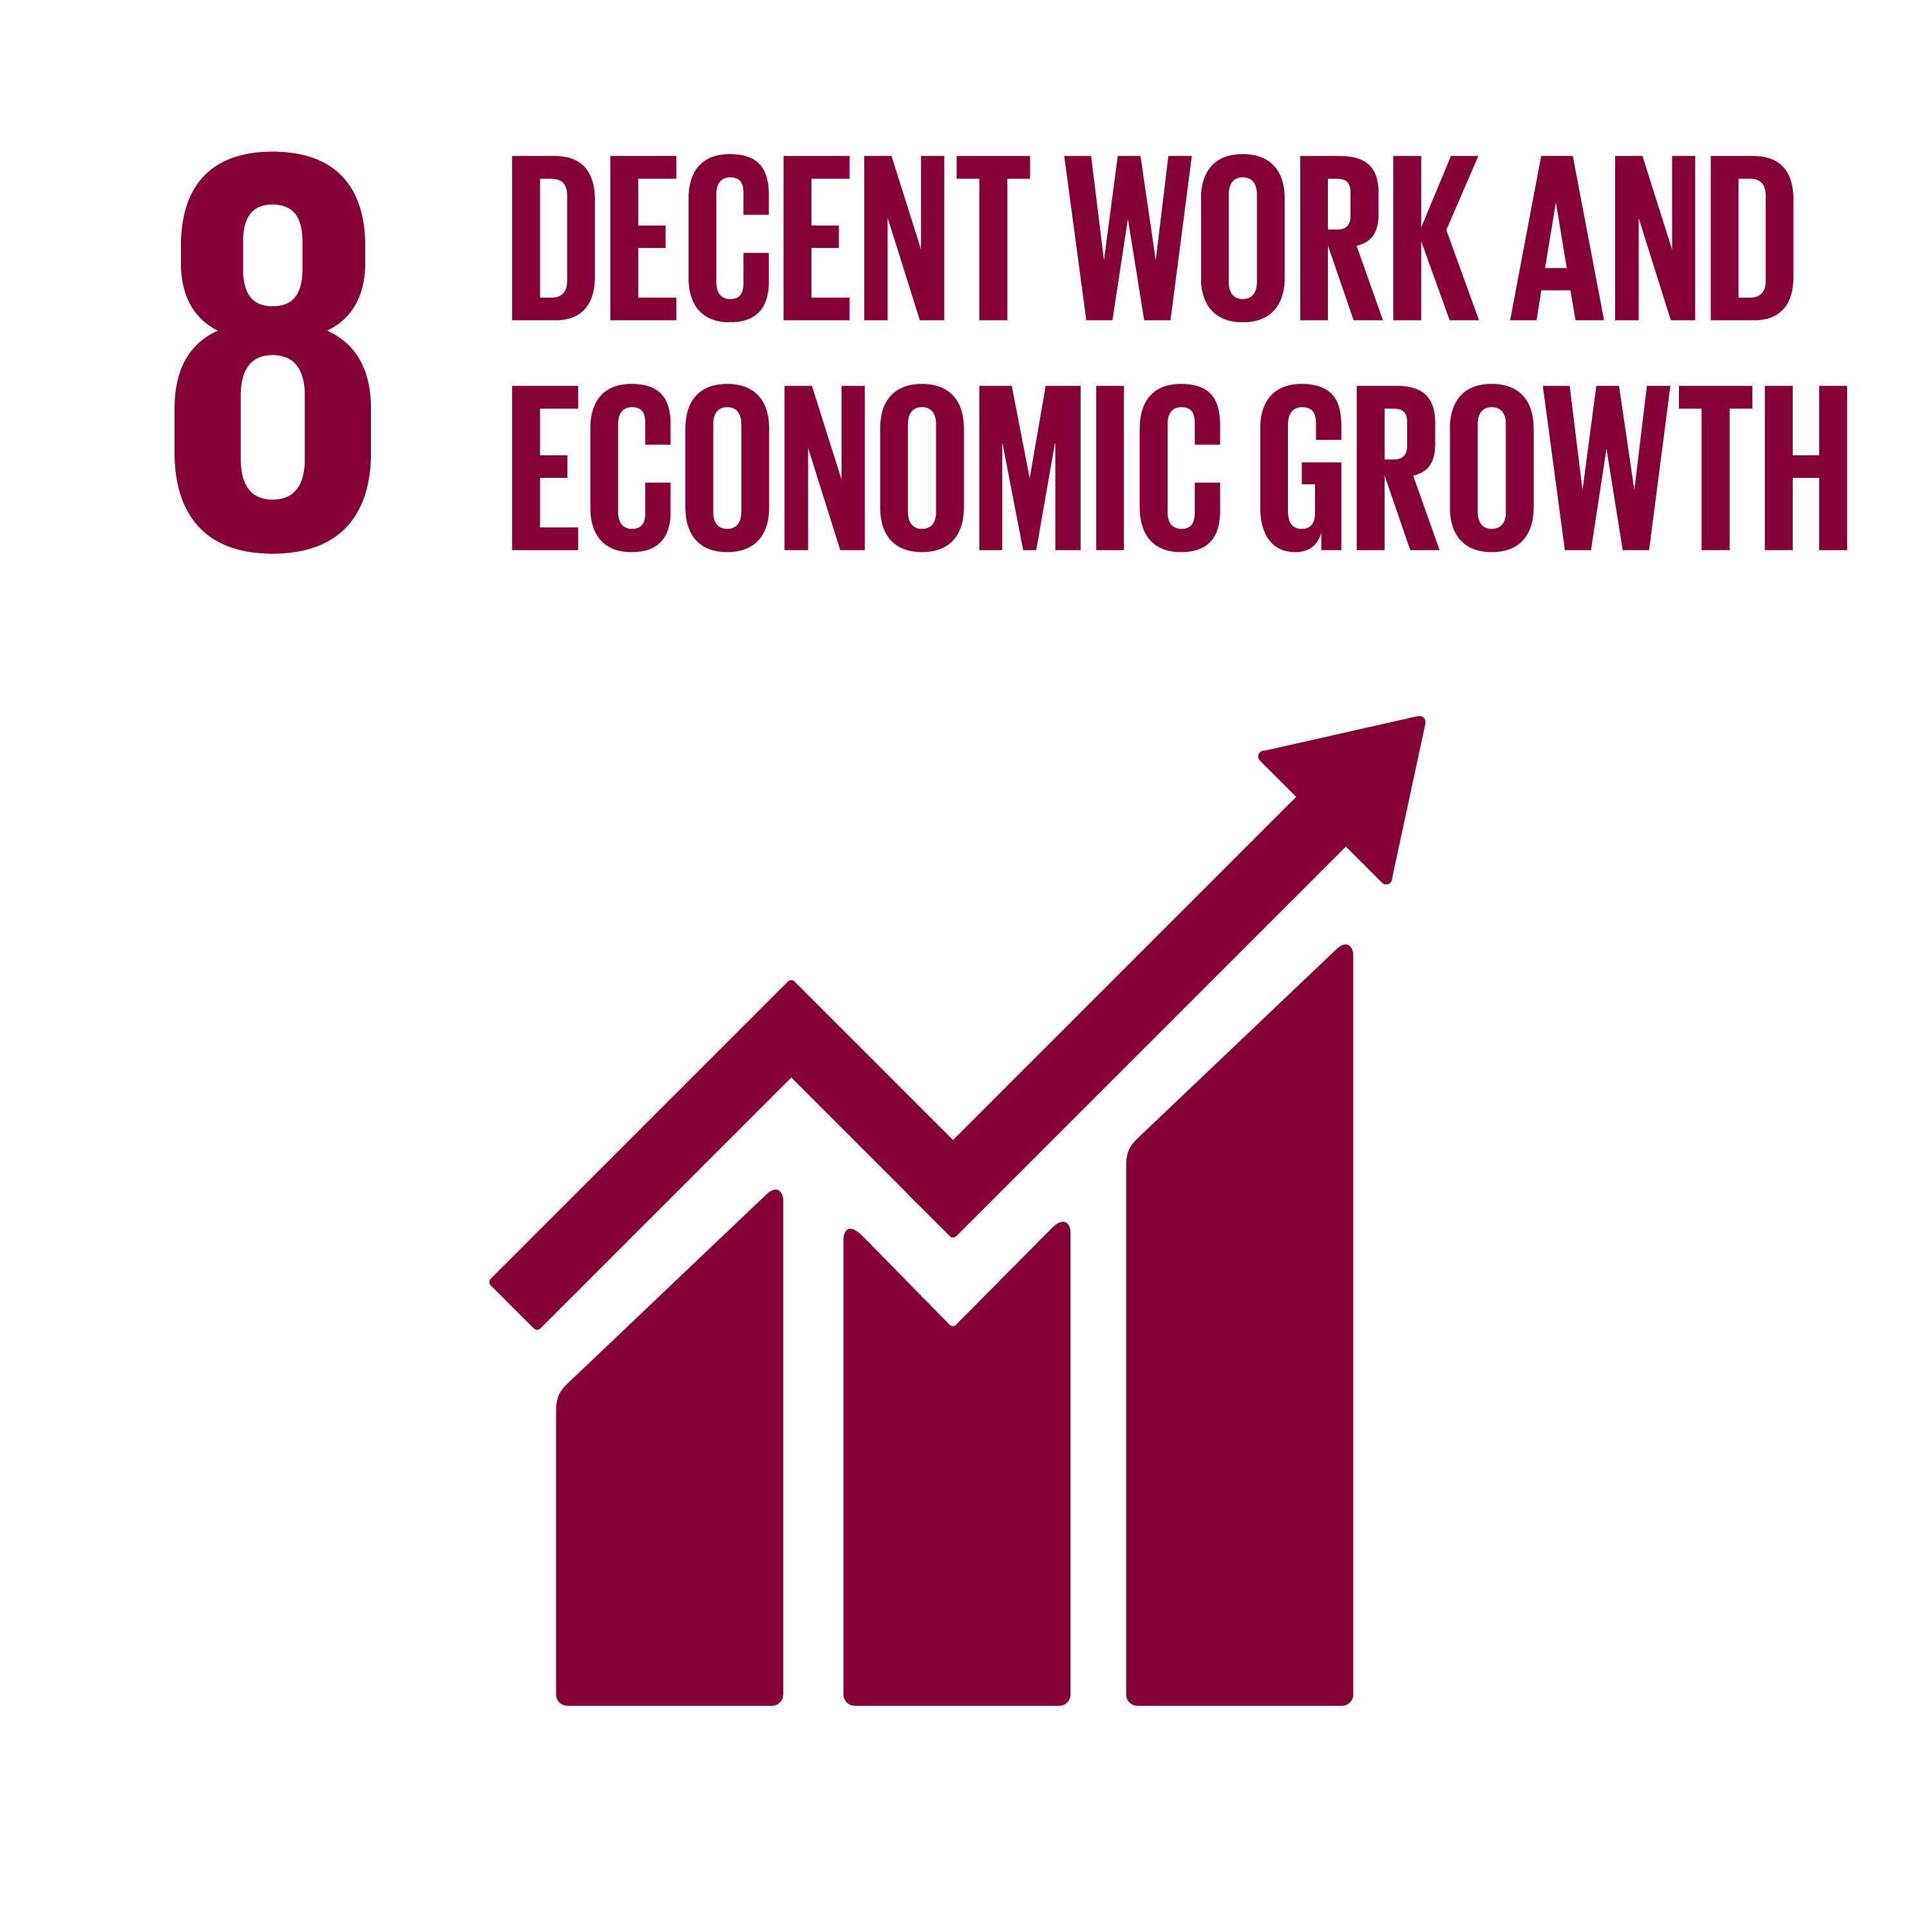 Sustainable development goals: Number 8 - Decent work and economic growth